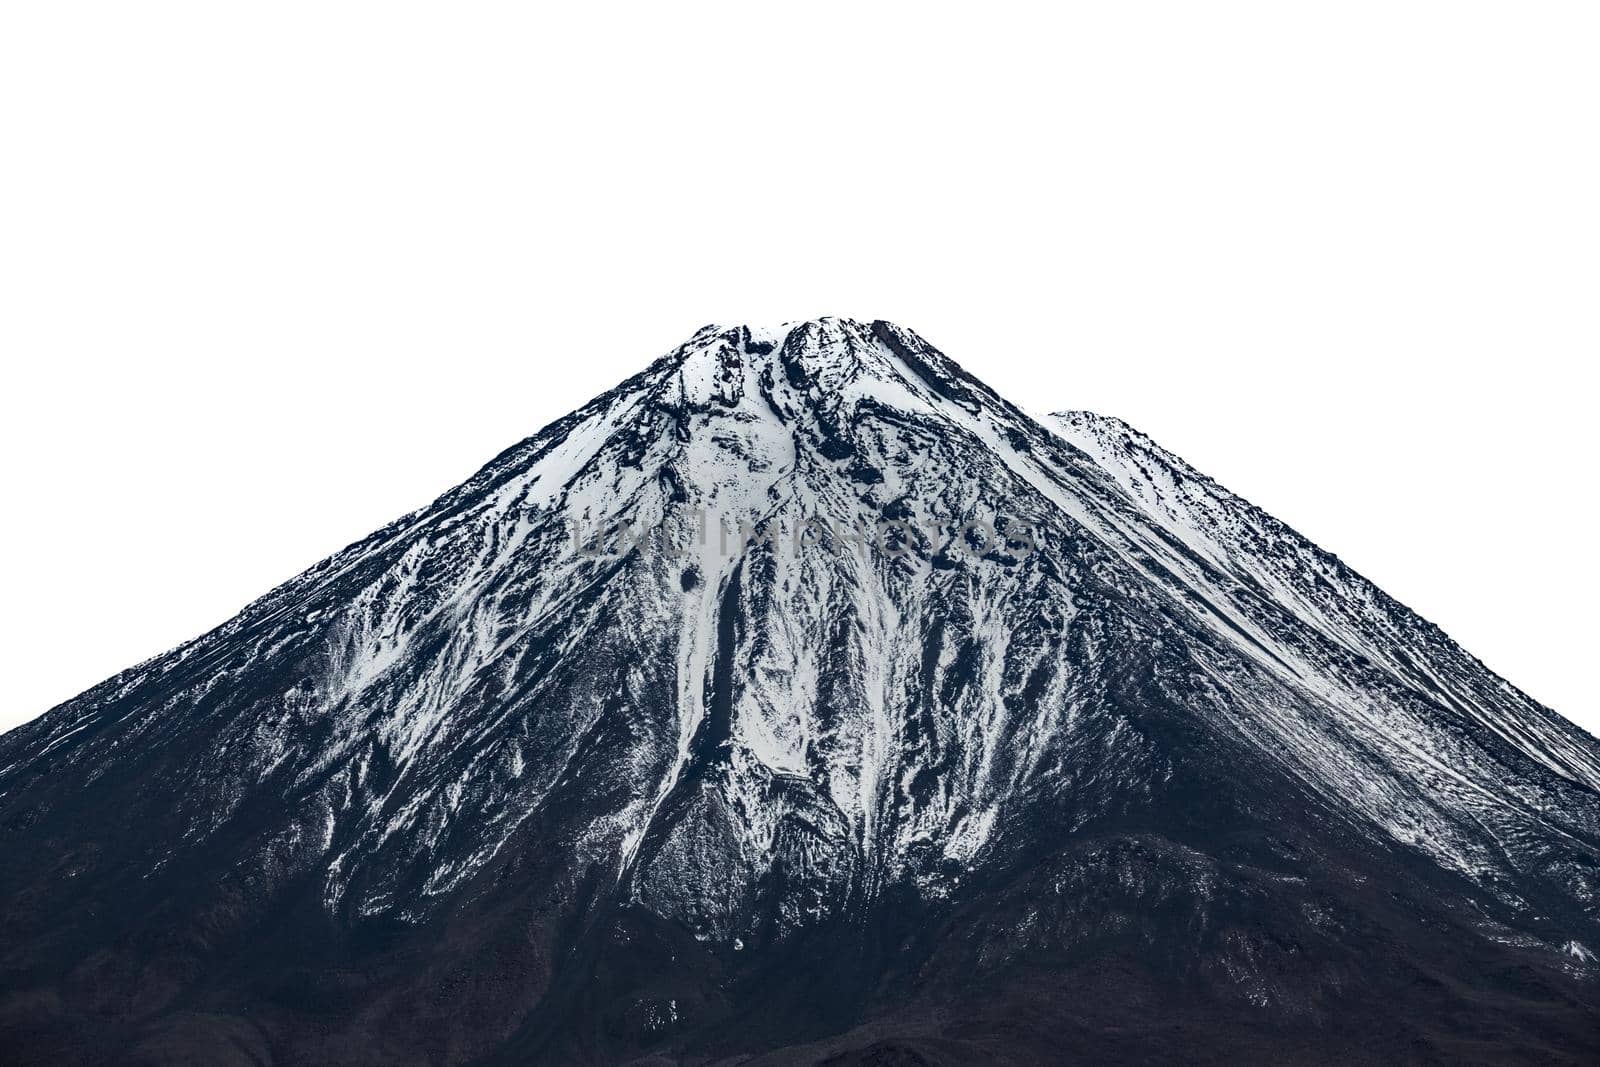 High volcano mountain peak with snow under clear white sky